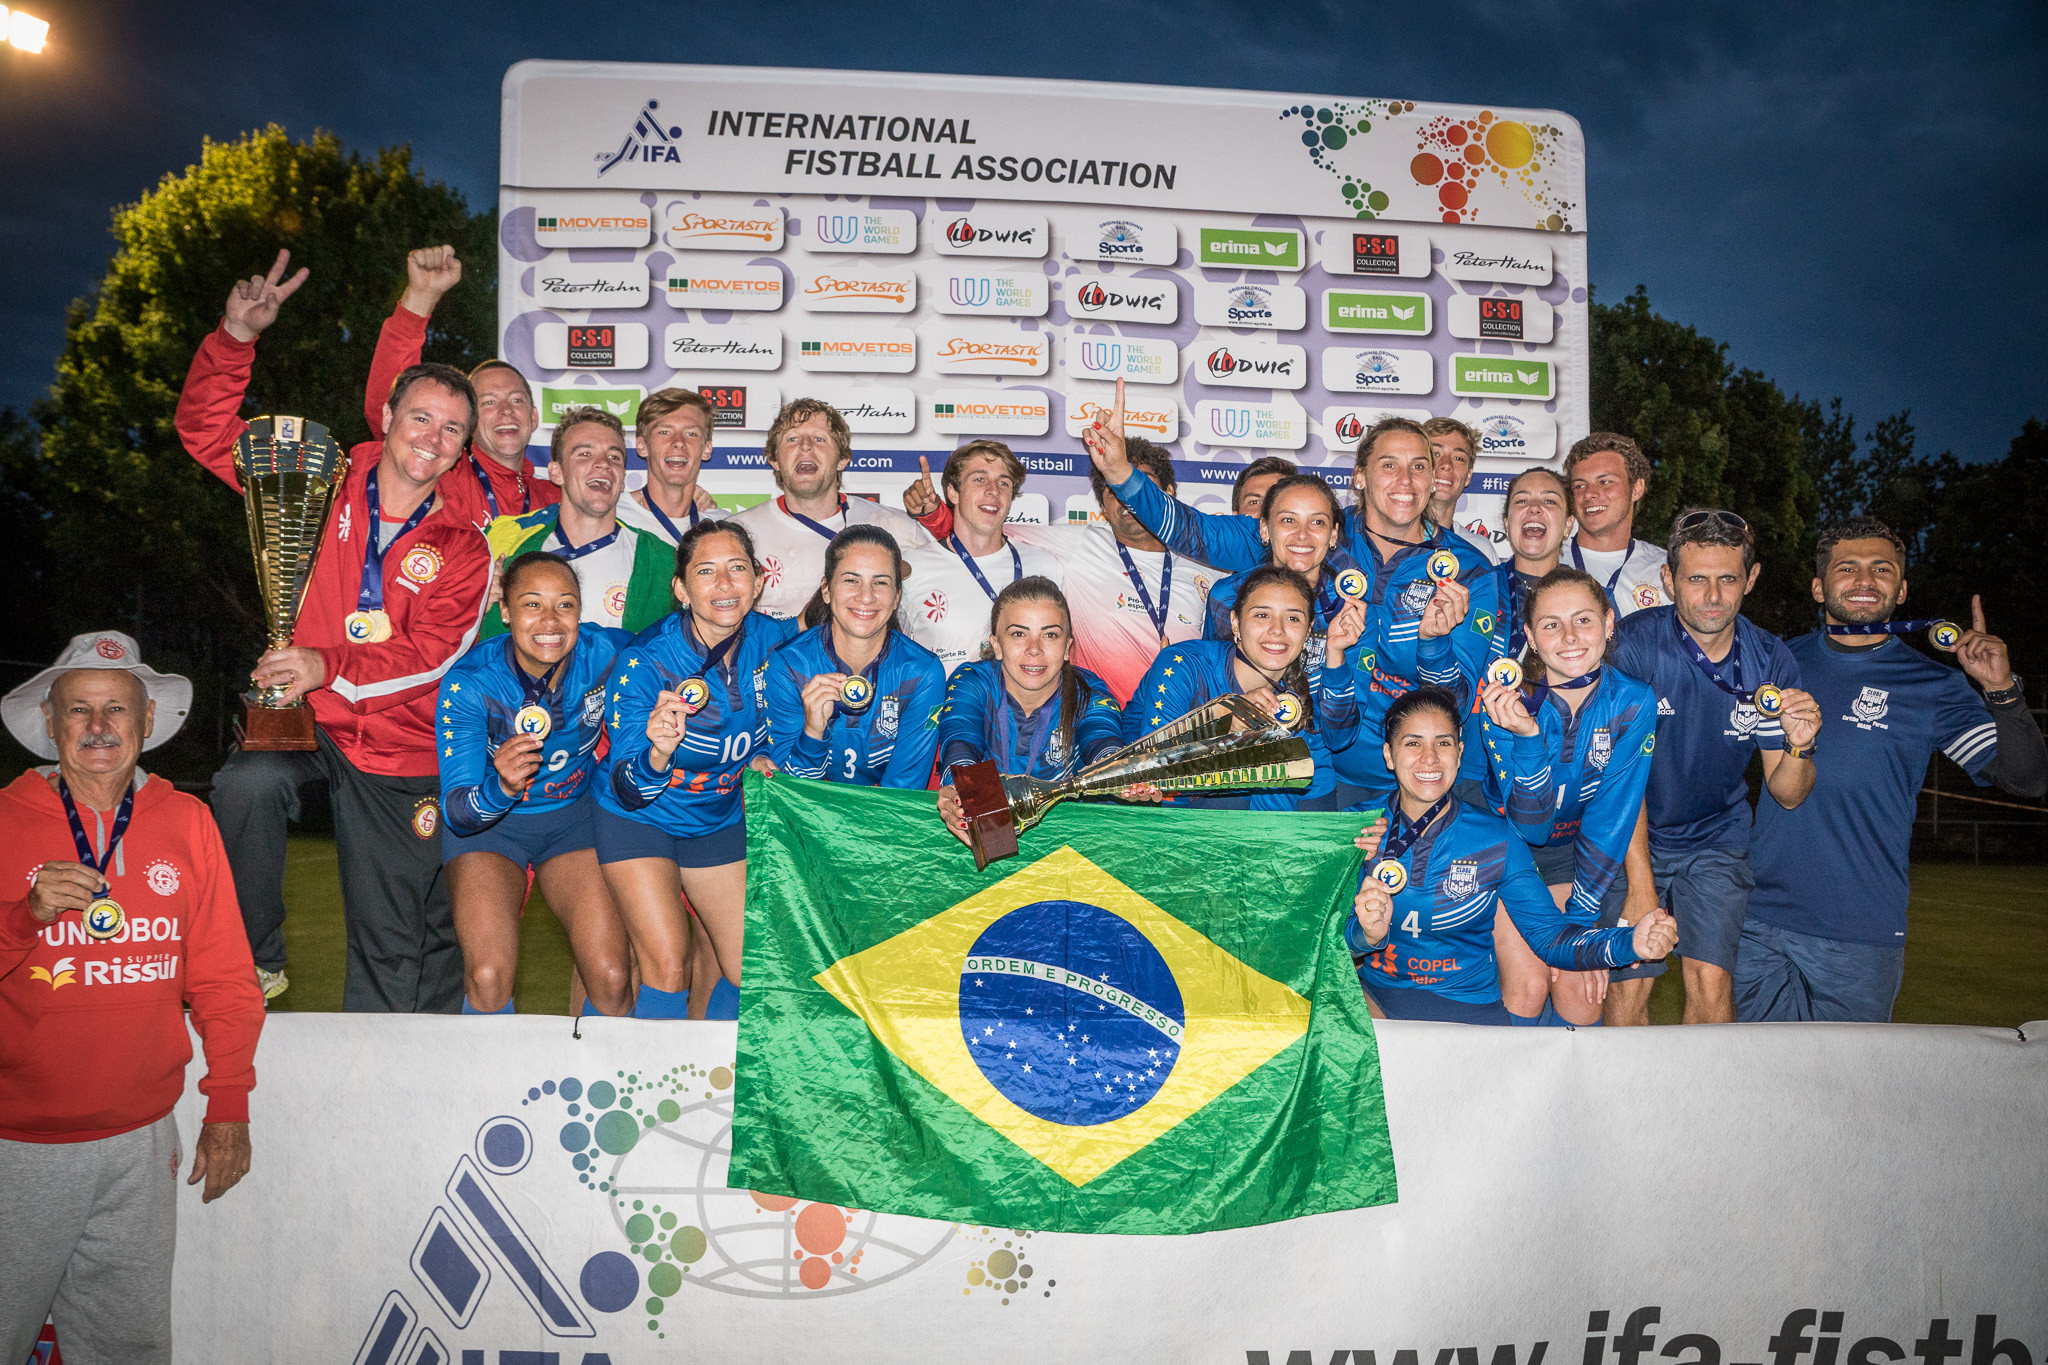 Sociedade Ginástica Novo Hamburgo and Clube Duque de Caxias will seek to defend their men’s and women’s titles at the 2019 International Fistball Assocation World Tour Finals in Salzburg ©IFA